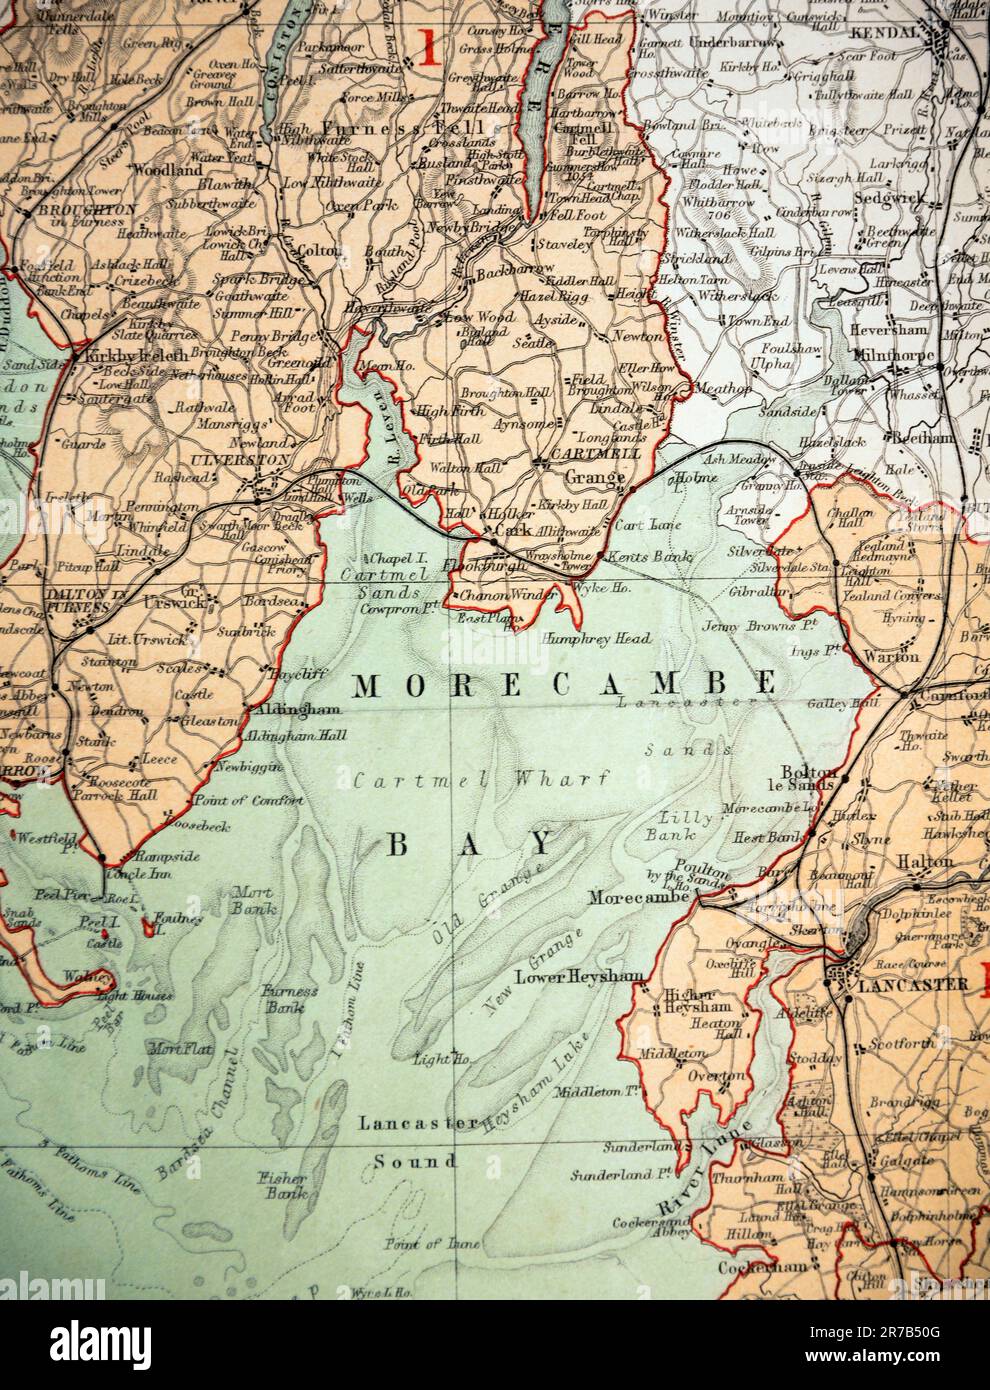 Detail from an 1868 Map of the County Palatine of Lancaster, so Lancashire as it was then, From the Ordnance Survey by J. Bartholomew F.R.G.S.; this section including Lancaster, Morecambe, Lower Heysham, River Lune, Cartmell, Ulverston, Dalton in Furness, Bardsea, Grange, Warton, Carnforth, Broughton in Furness, Newby Bridge, Bolton le Sands, Cark, Flookburgh, Morecambe Bay. In the cream tinted area are Kendal, Milnthorpe and Beetham. Stock Photo